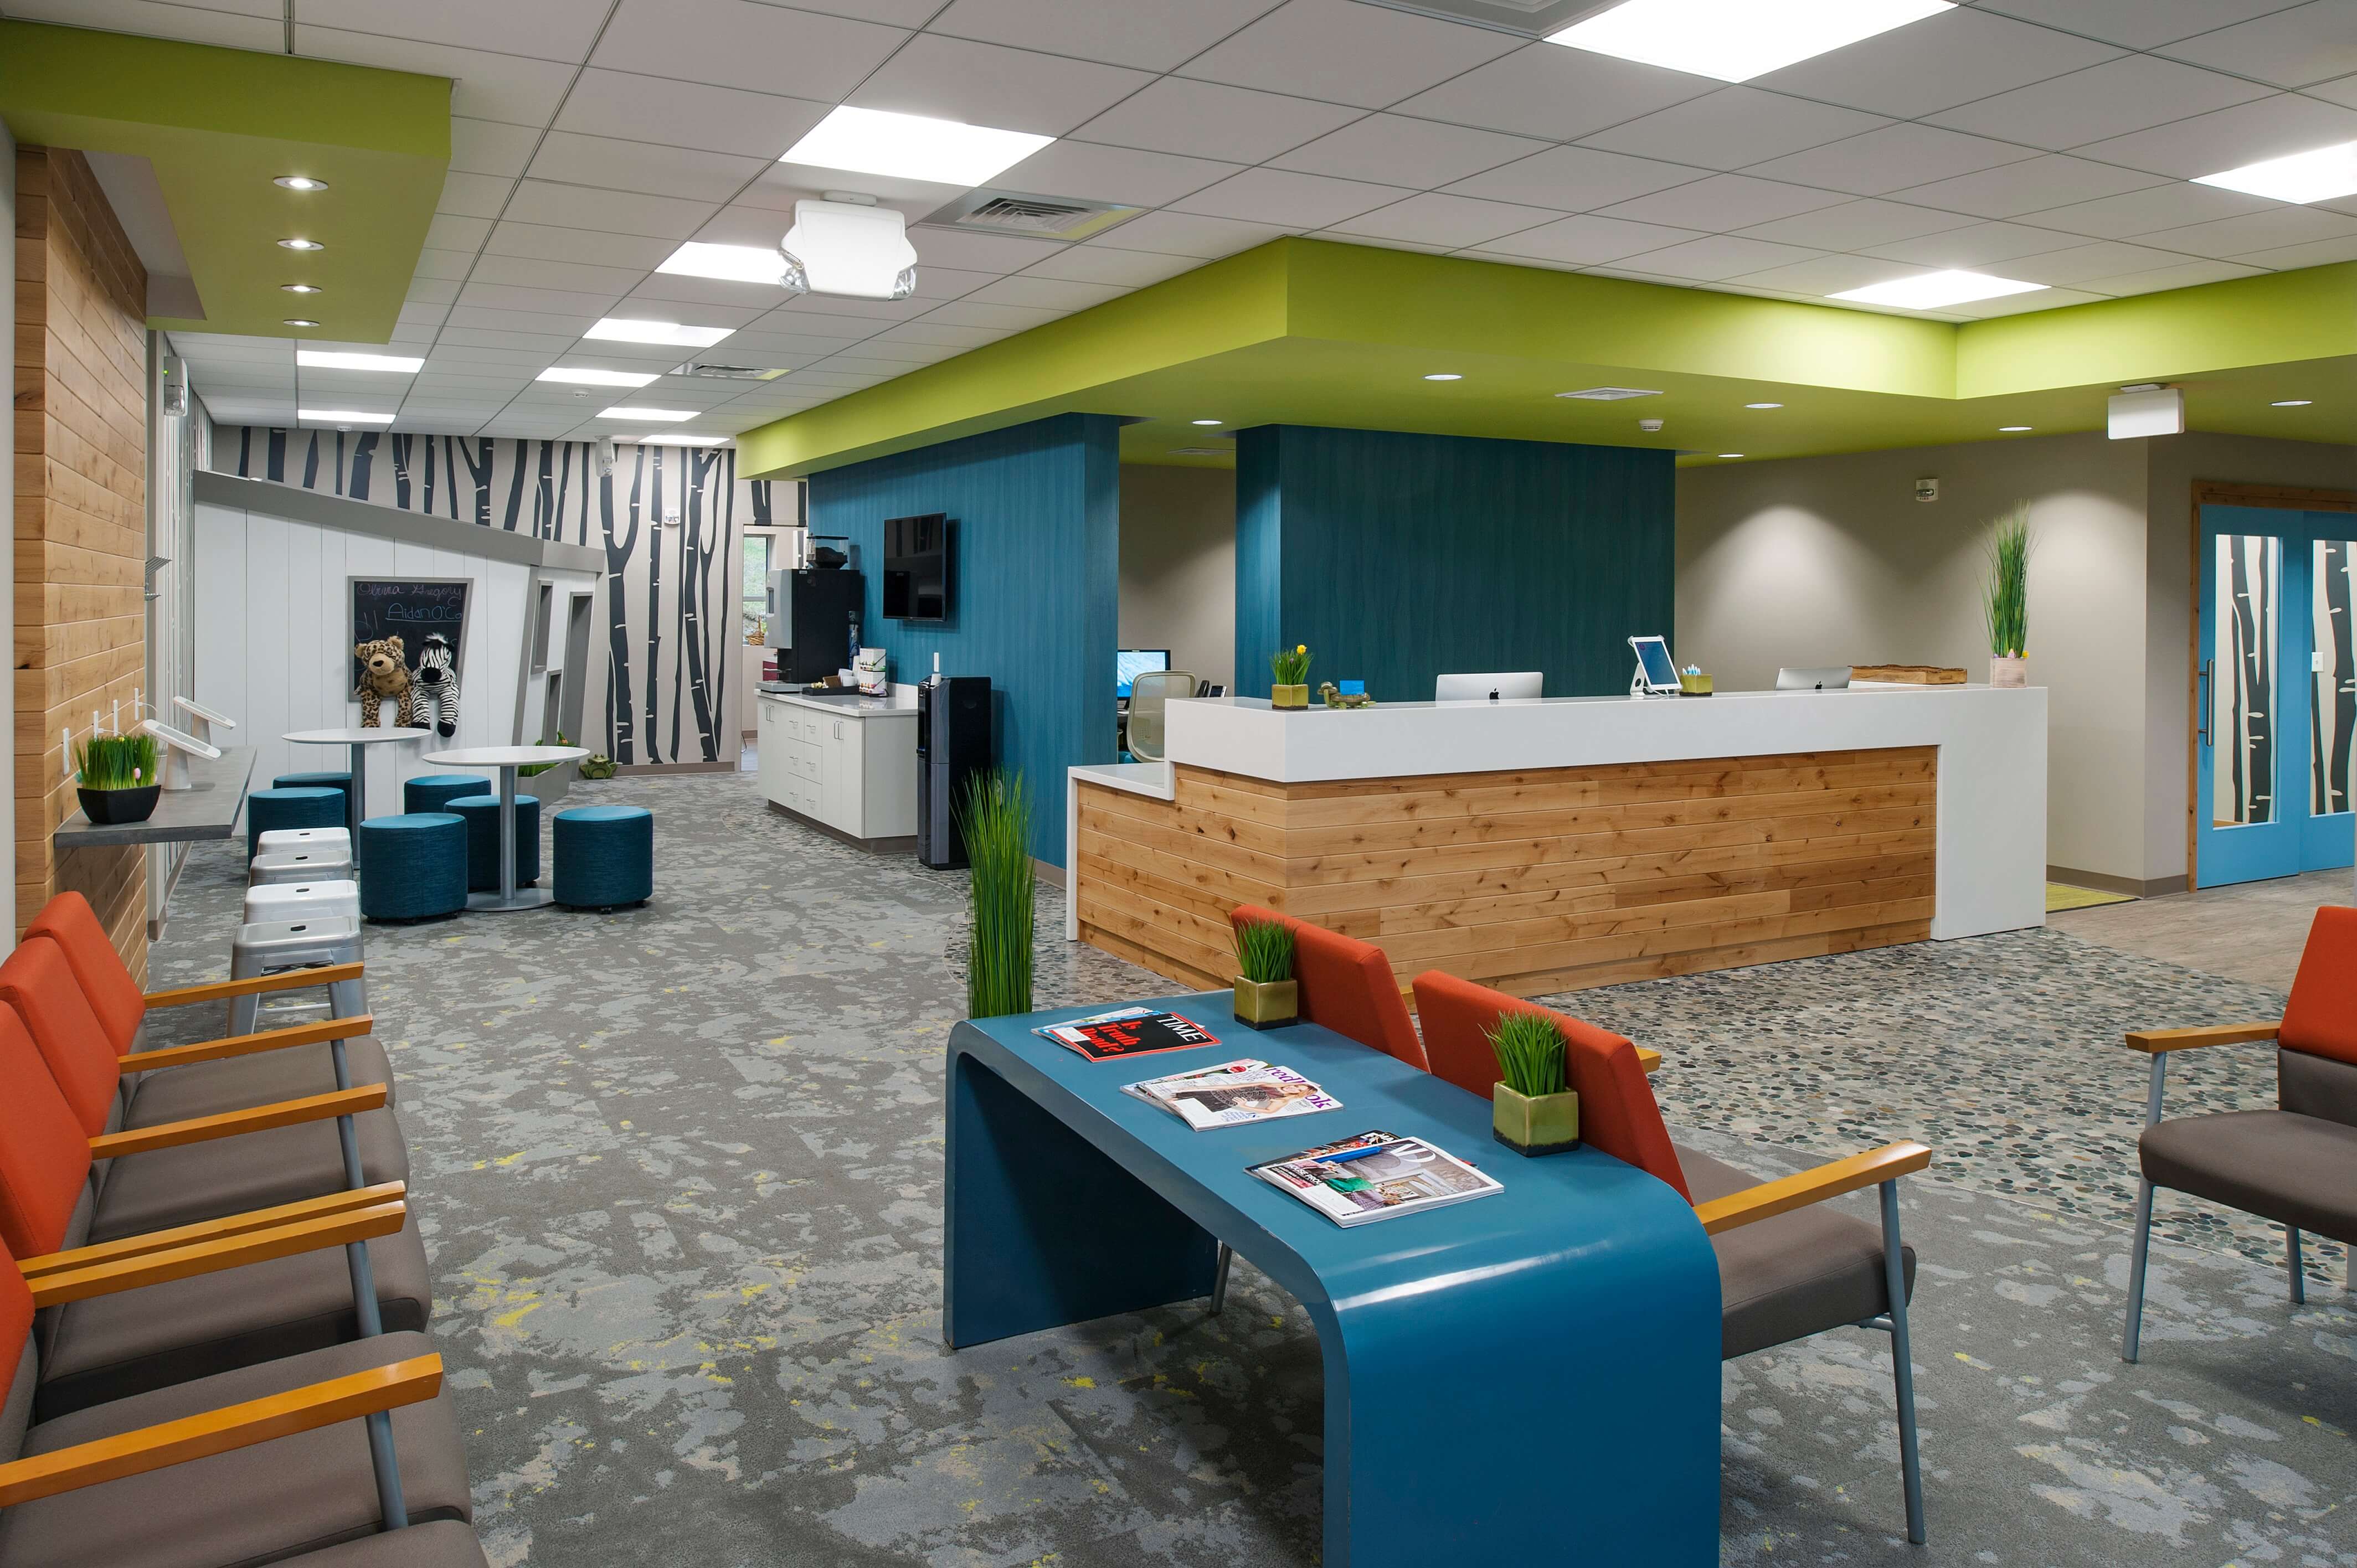 Skepton Construction brings the outdoors in to Tighe Orthodontics